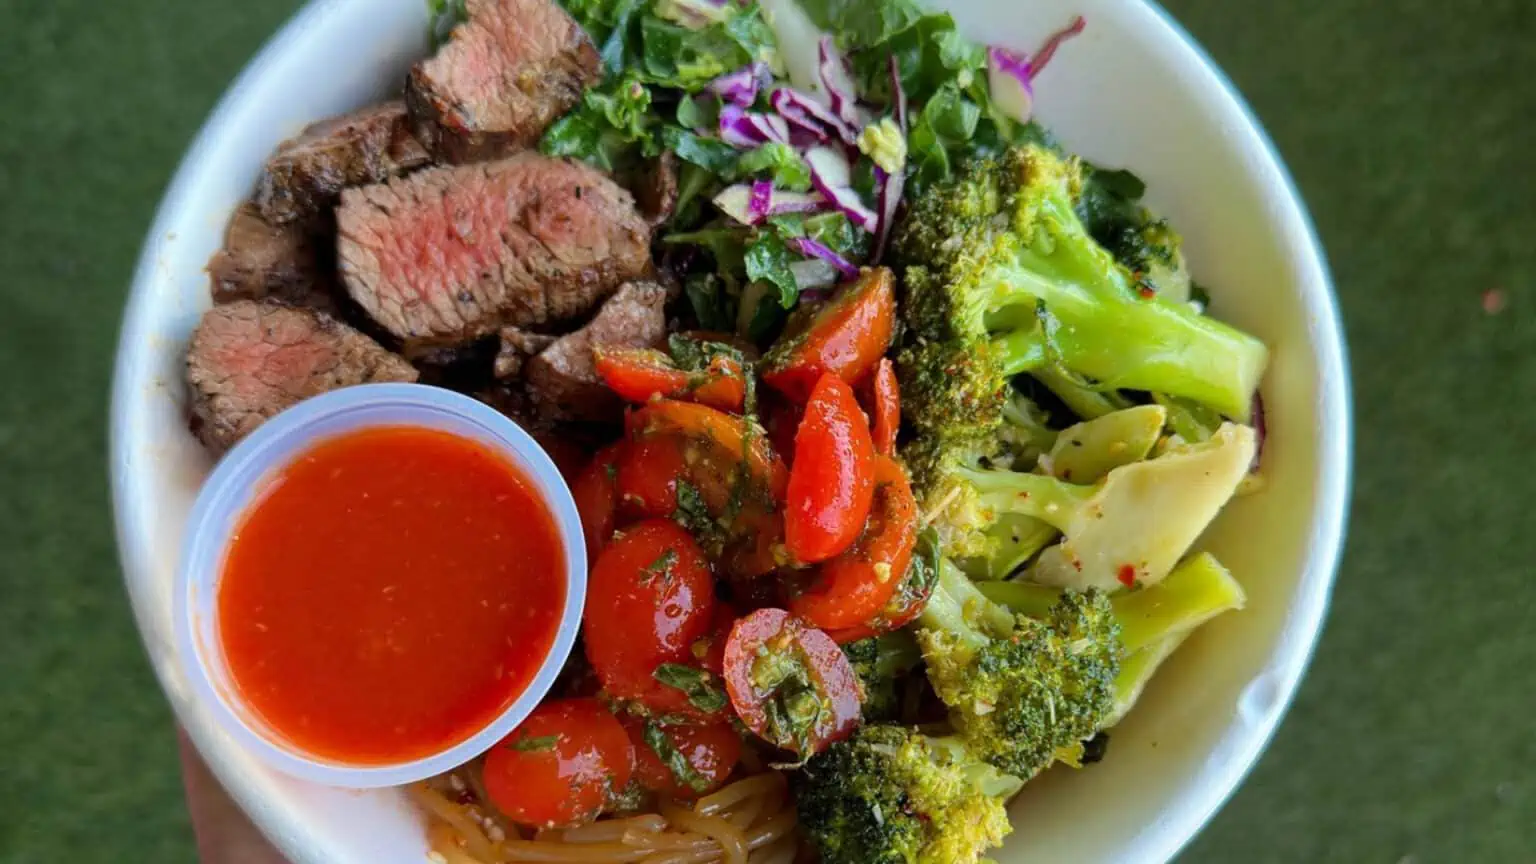 A fresh kitchen bowl with steak, tomatoes, broccoli, and more